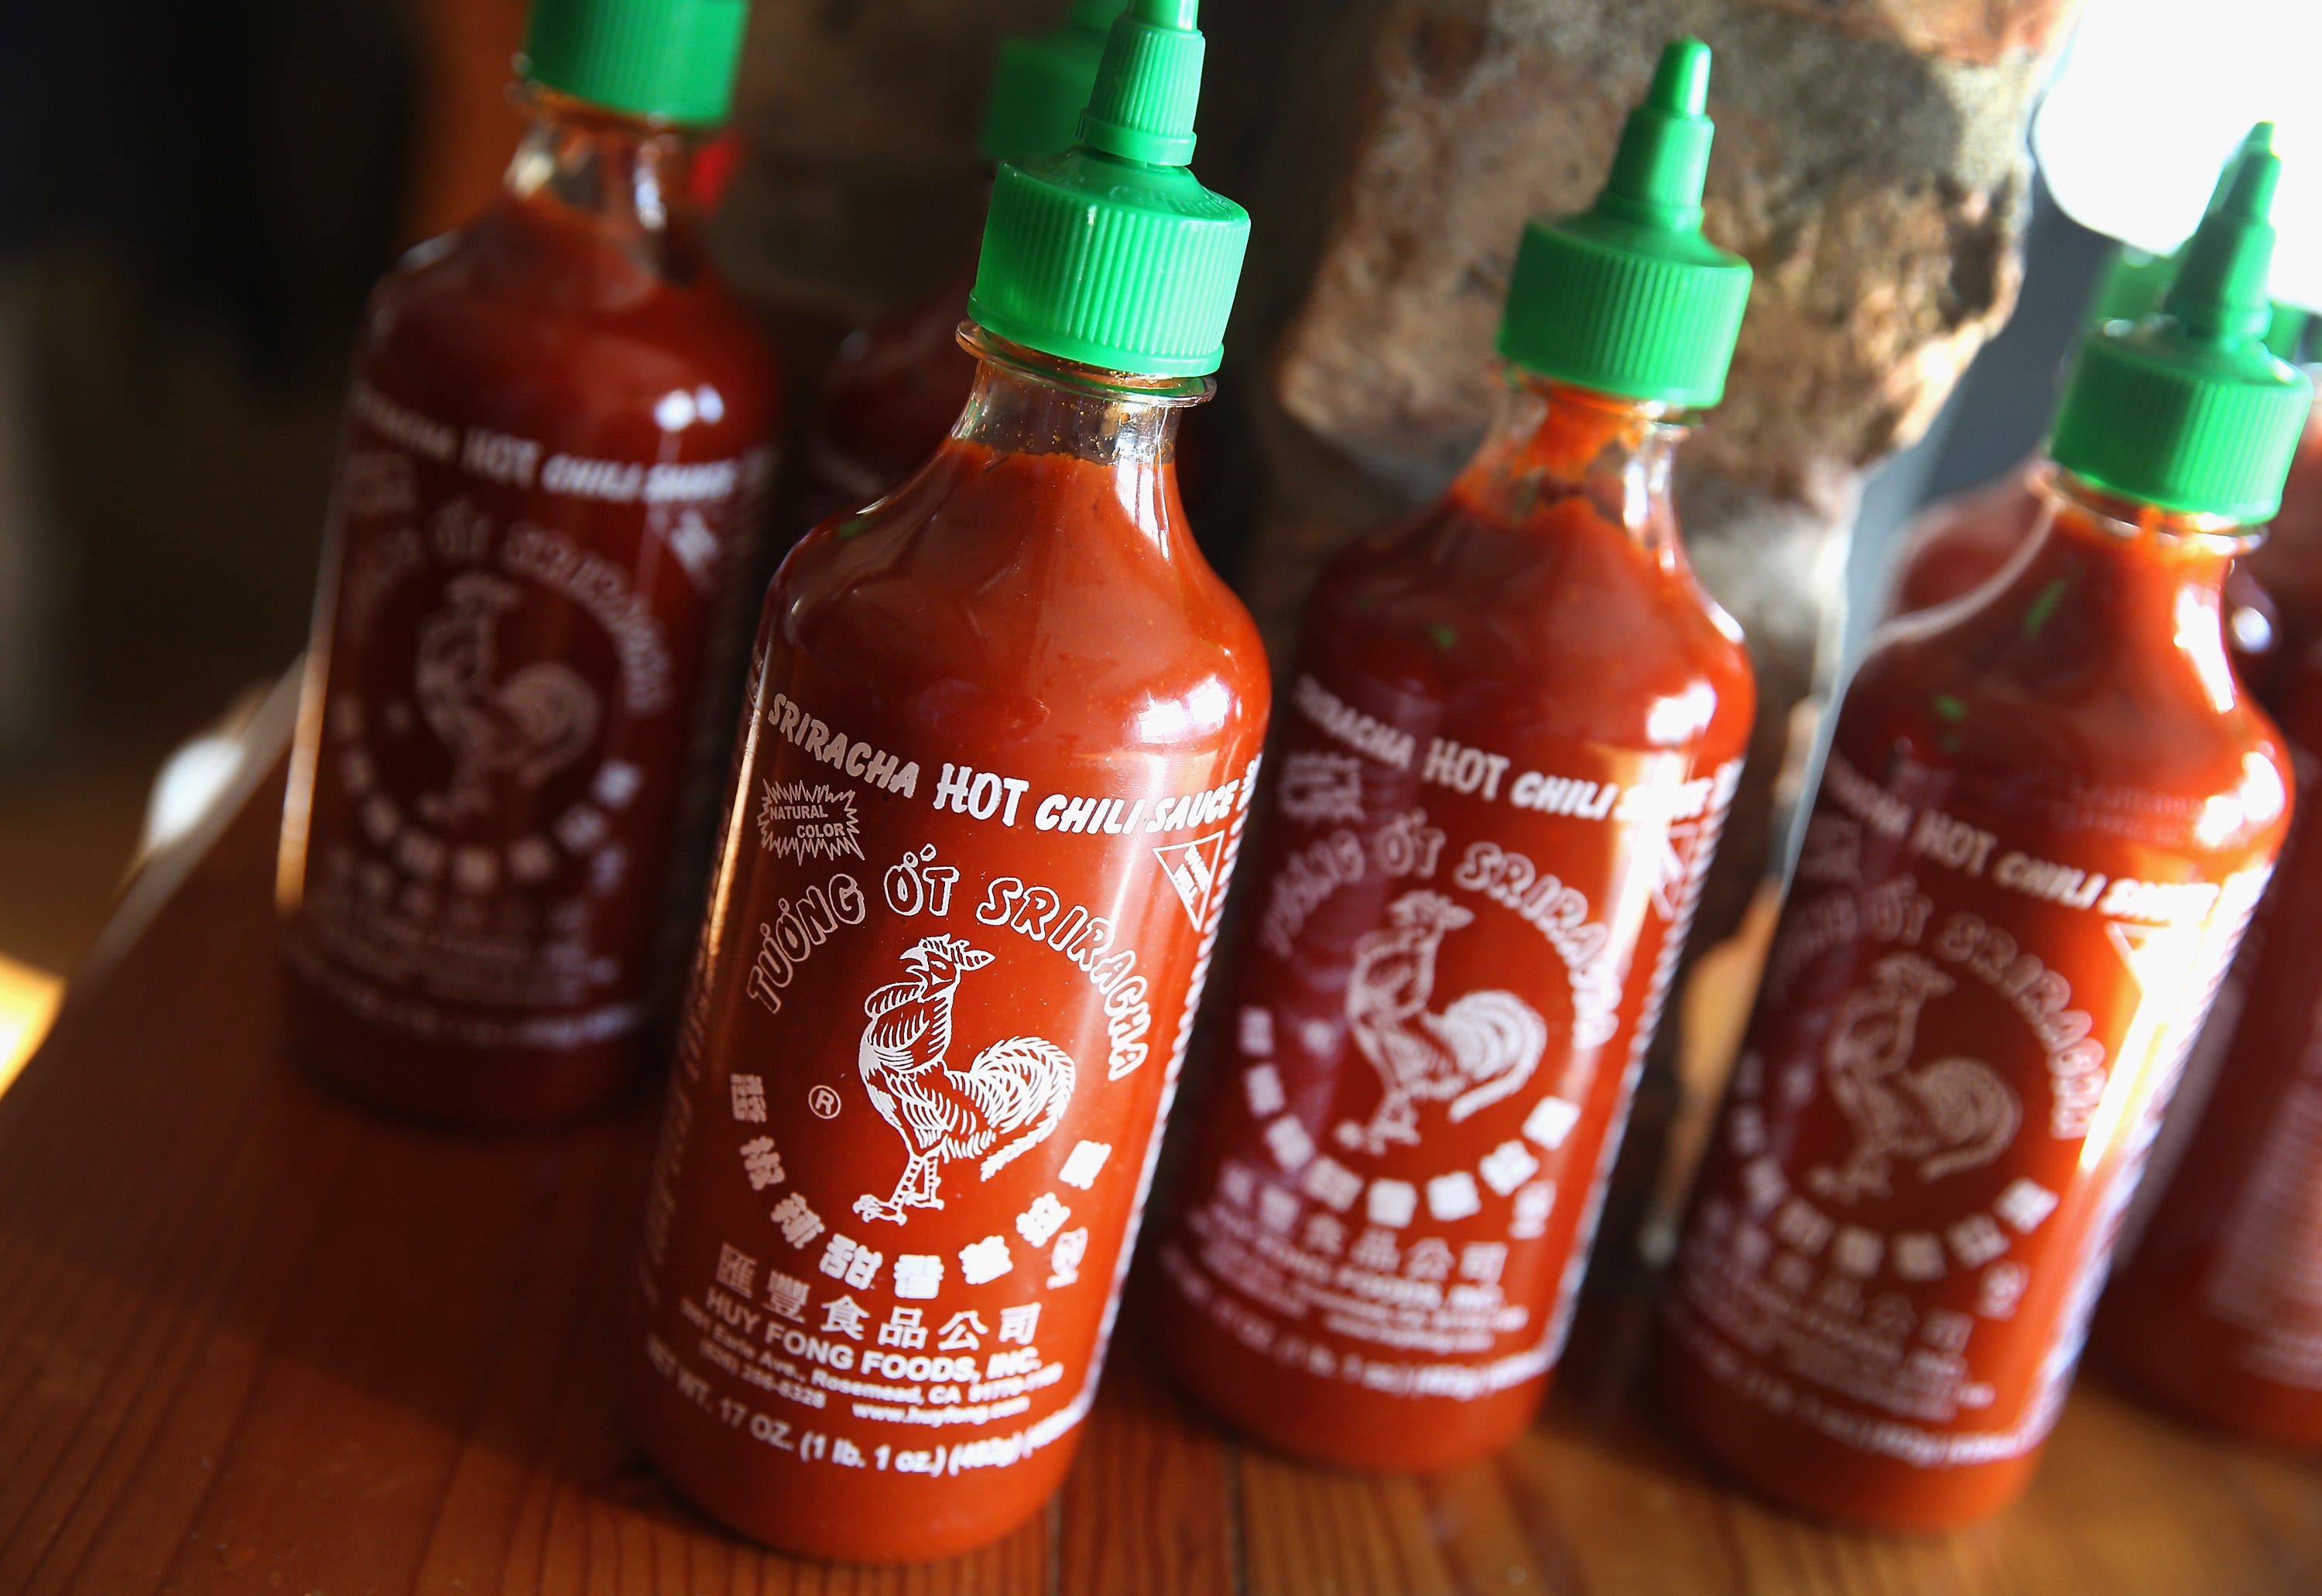 hold onto your sriracha: huy fong foods halts production. is another shortage coming?